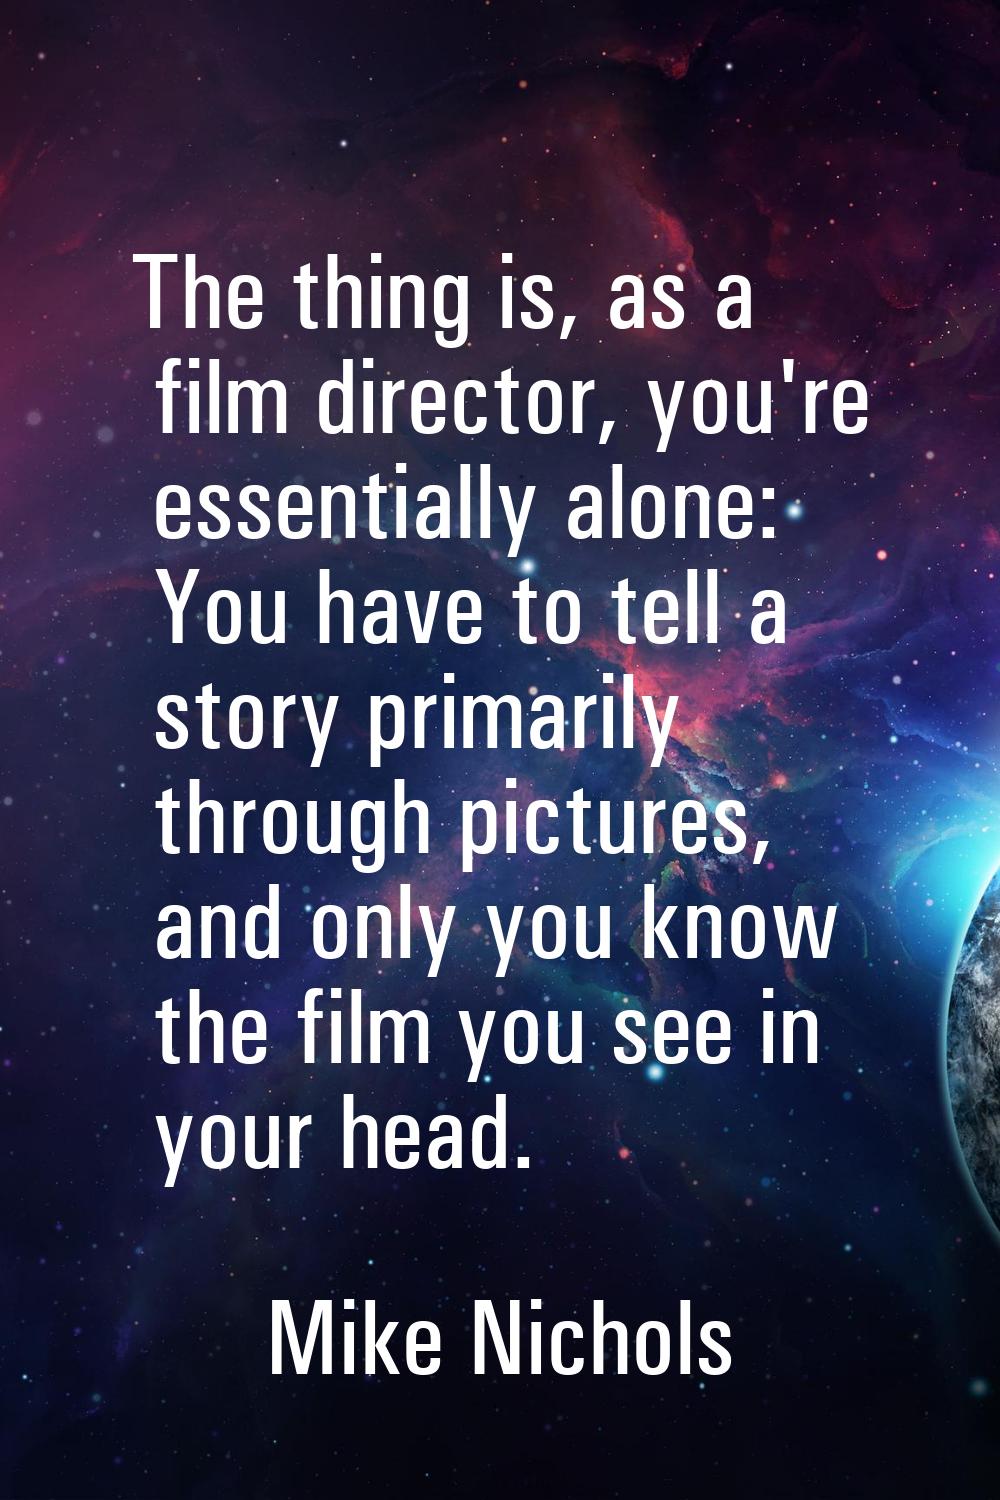 The thing is, as a film director, you're essentially alone: You have to tell a story primarily thro